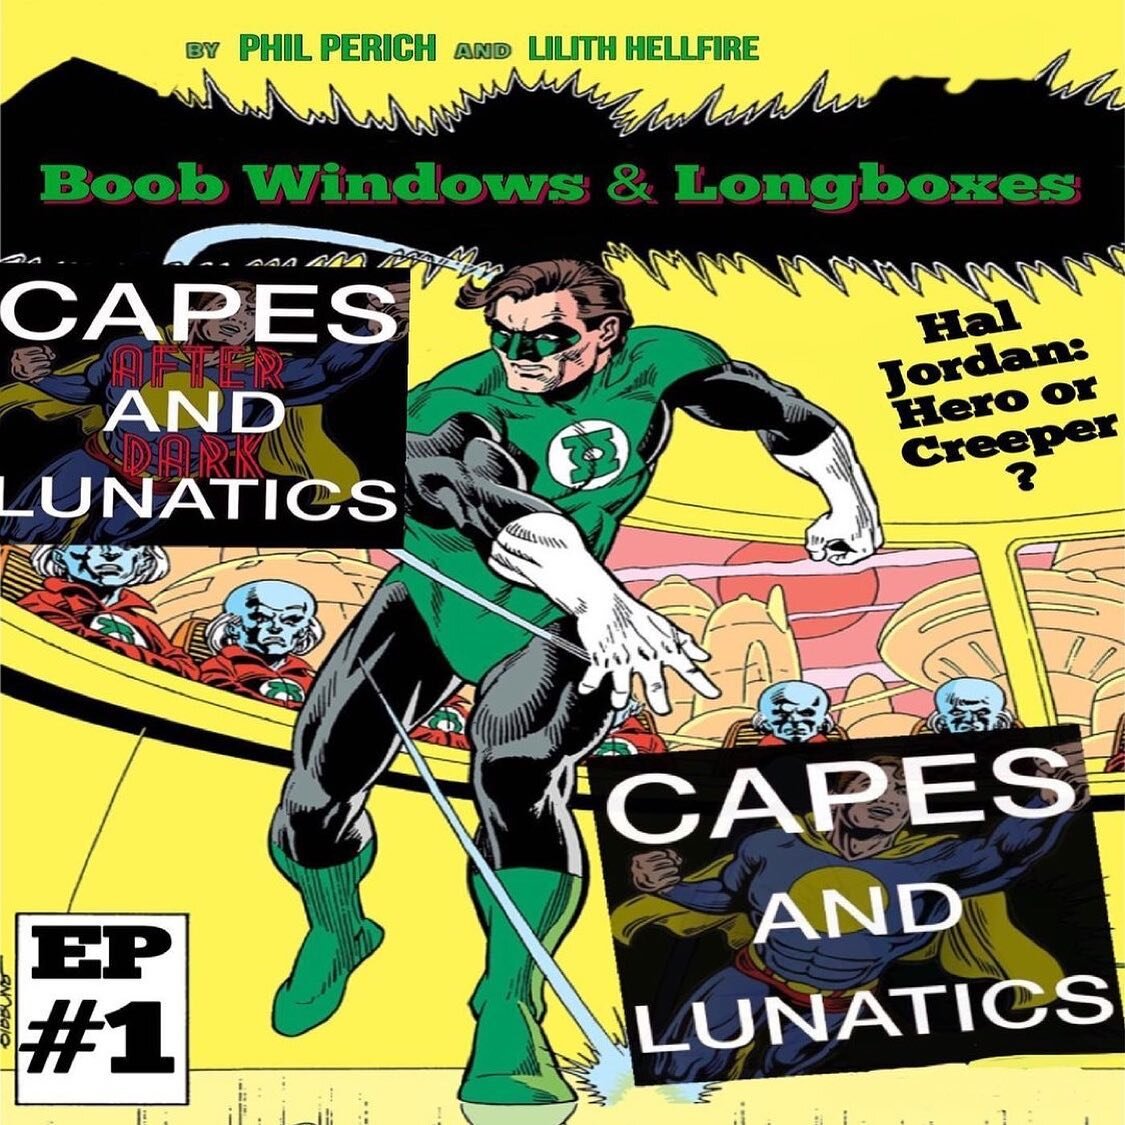 Repost from @capesandlunatics
&bull;
The March #patreon episode is up! Check out Episode 1 of Boob Windows and Longboxes as @nightwingpdp and @lilithhellfire86 review the life and career of #greenlantern #haljordan ! You can listen now for as low as 